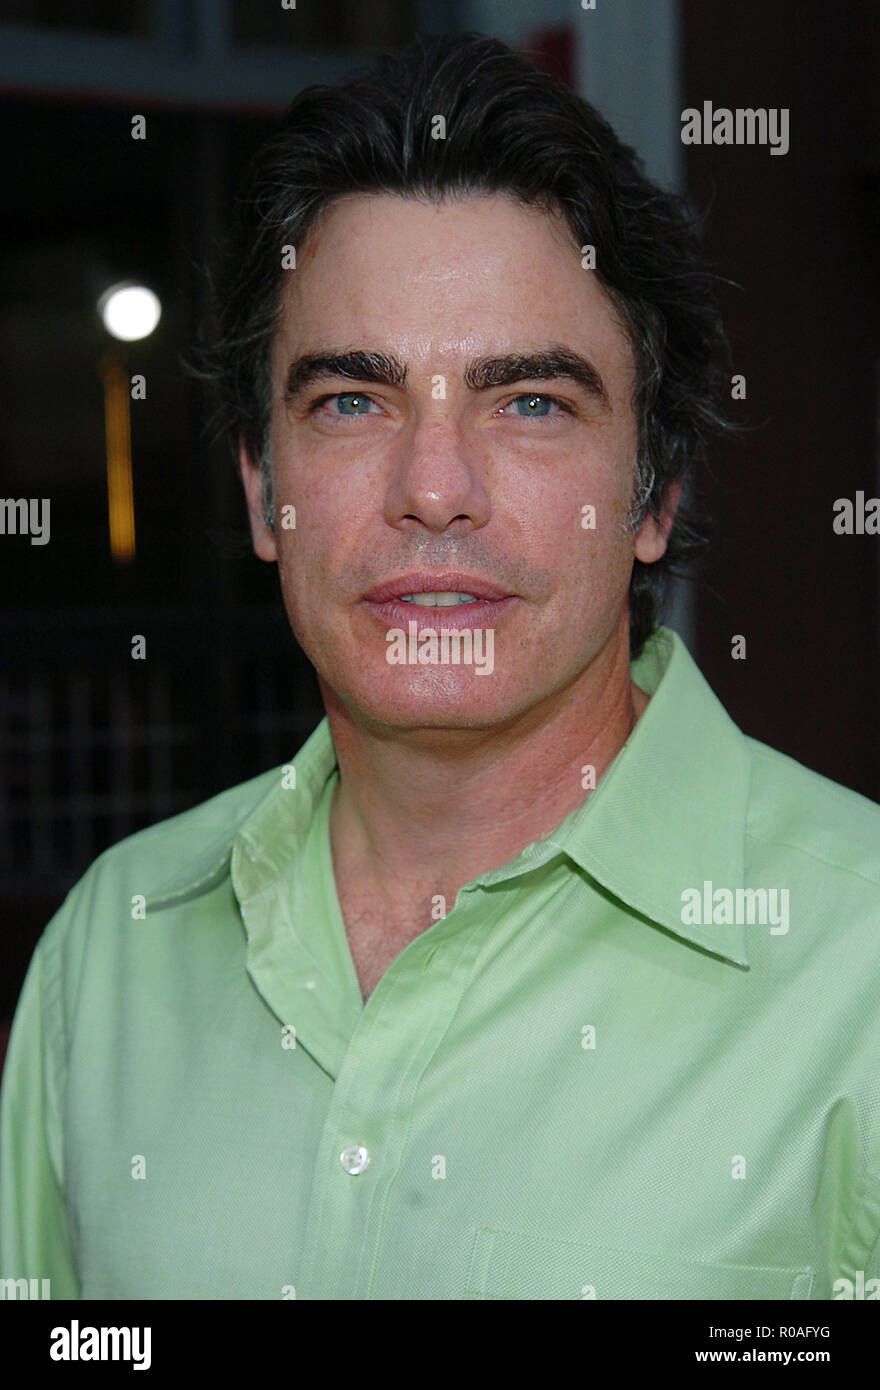 Peter Gallagher (OC) arriving at the 2004 Summer tca Fox All-Star Party on the Fox Lot in Los Angeles. July 16, 2004. GallagherPeter OC 022 Red Carpet Event, Vertical, USA, Film Industry, Celebrities,  Photography, Bestof, Arts Culture and Entertainment, Topix Celebrities fashion /  Vertical, Best of, Event in Hollywood Life - California,  Red Carpet and backstage, USA, Film Industry, Celebrities,  movie celebrities, TV celebrities, Music celebrities, Photography, Bestof, Arts Culture and Entertainment,  Topix, headshot, vertical, one person,, from the year , 2004, inquiry tsuni@Gamma-USA.com Stock Photo